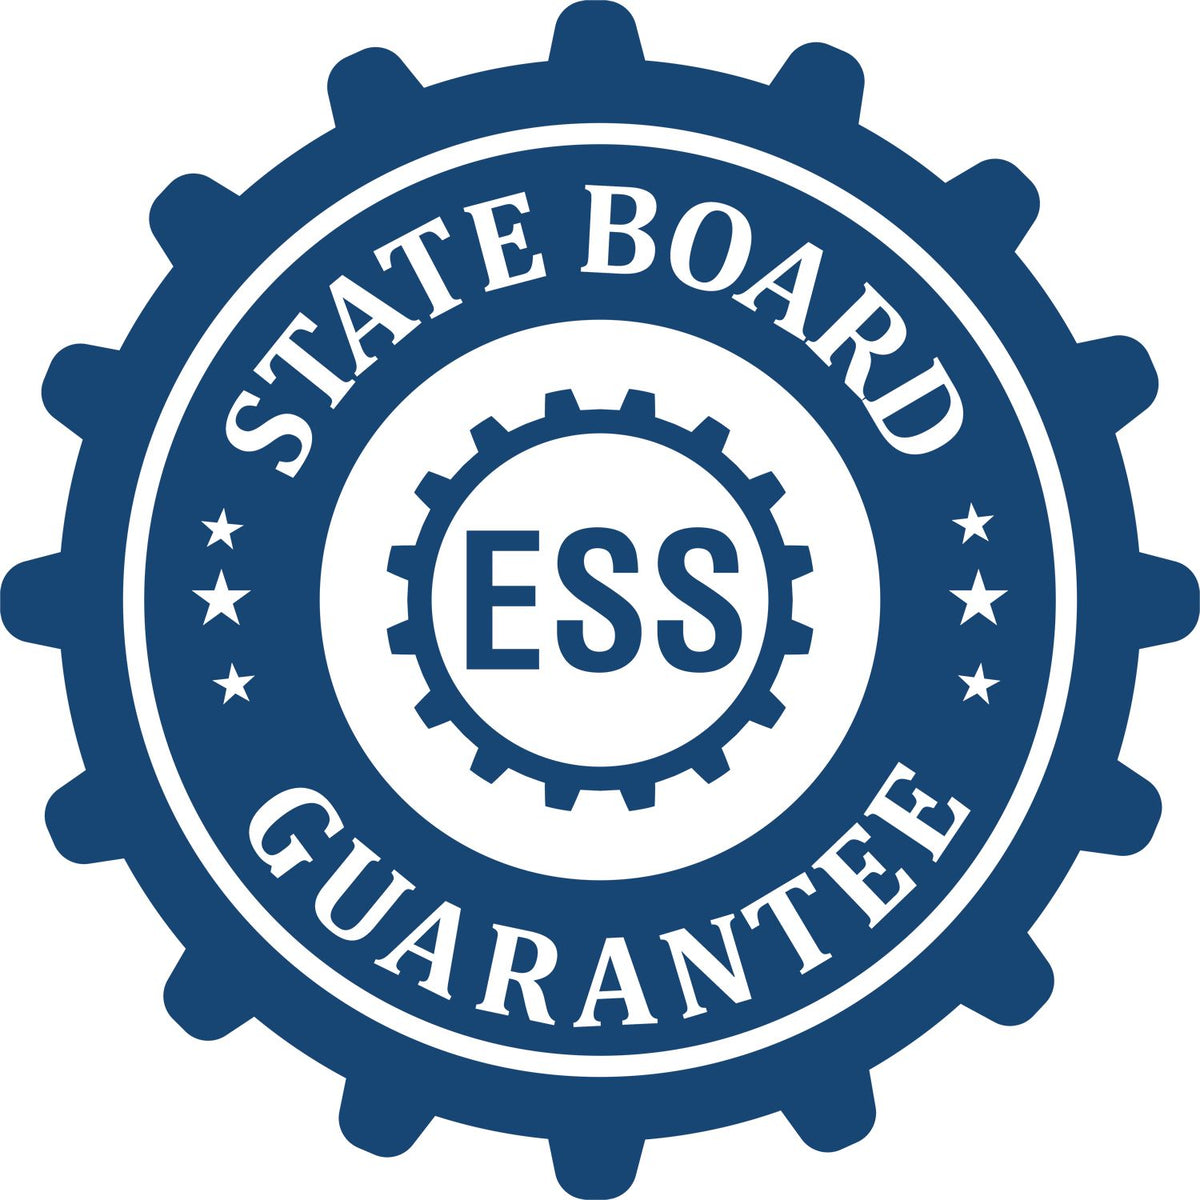 An emblem in a gear shape illustrating a state board guarantee for the Hybrid Mississippi Engineer Seal